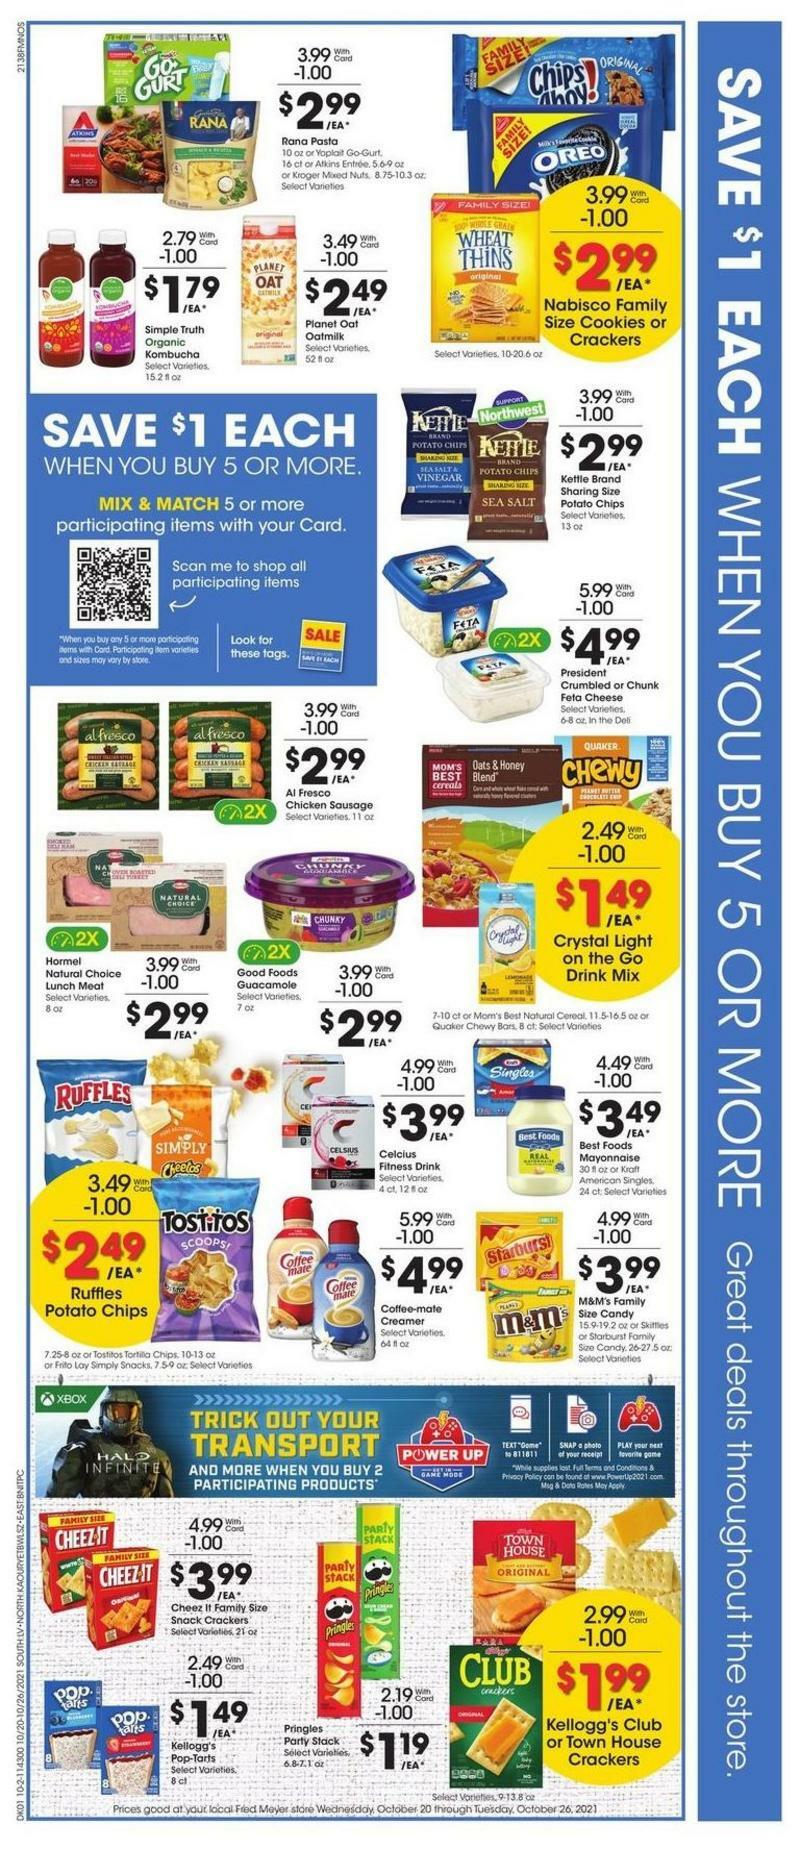 Fred Meyer Weekly Ad from October 20